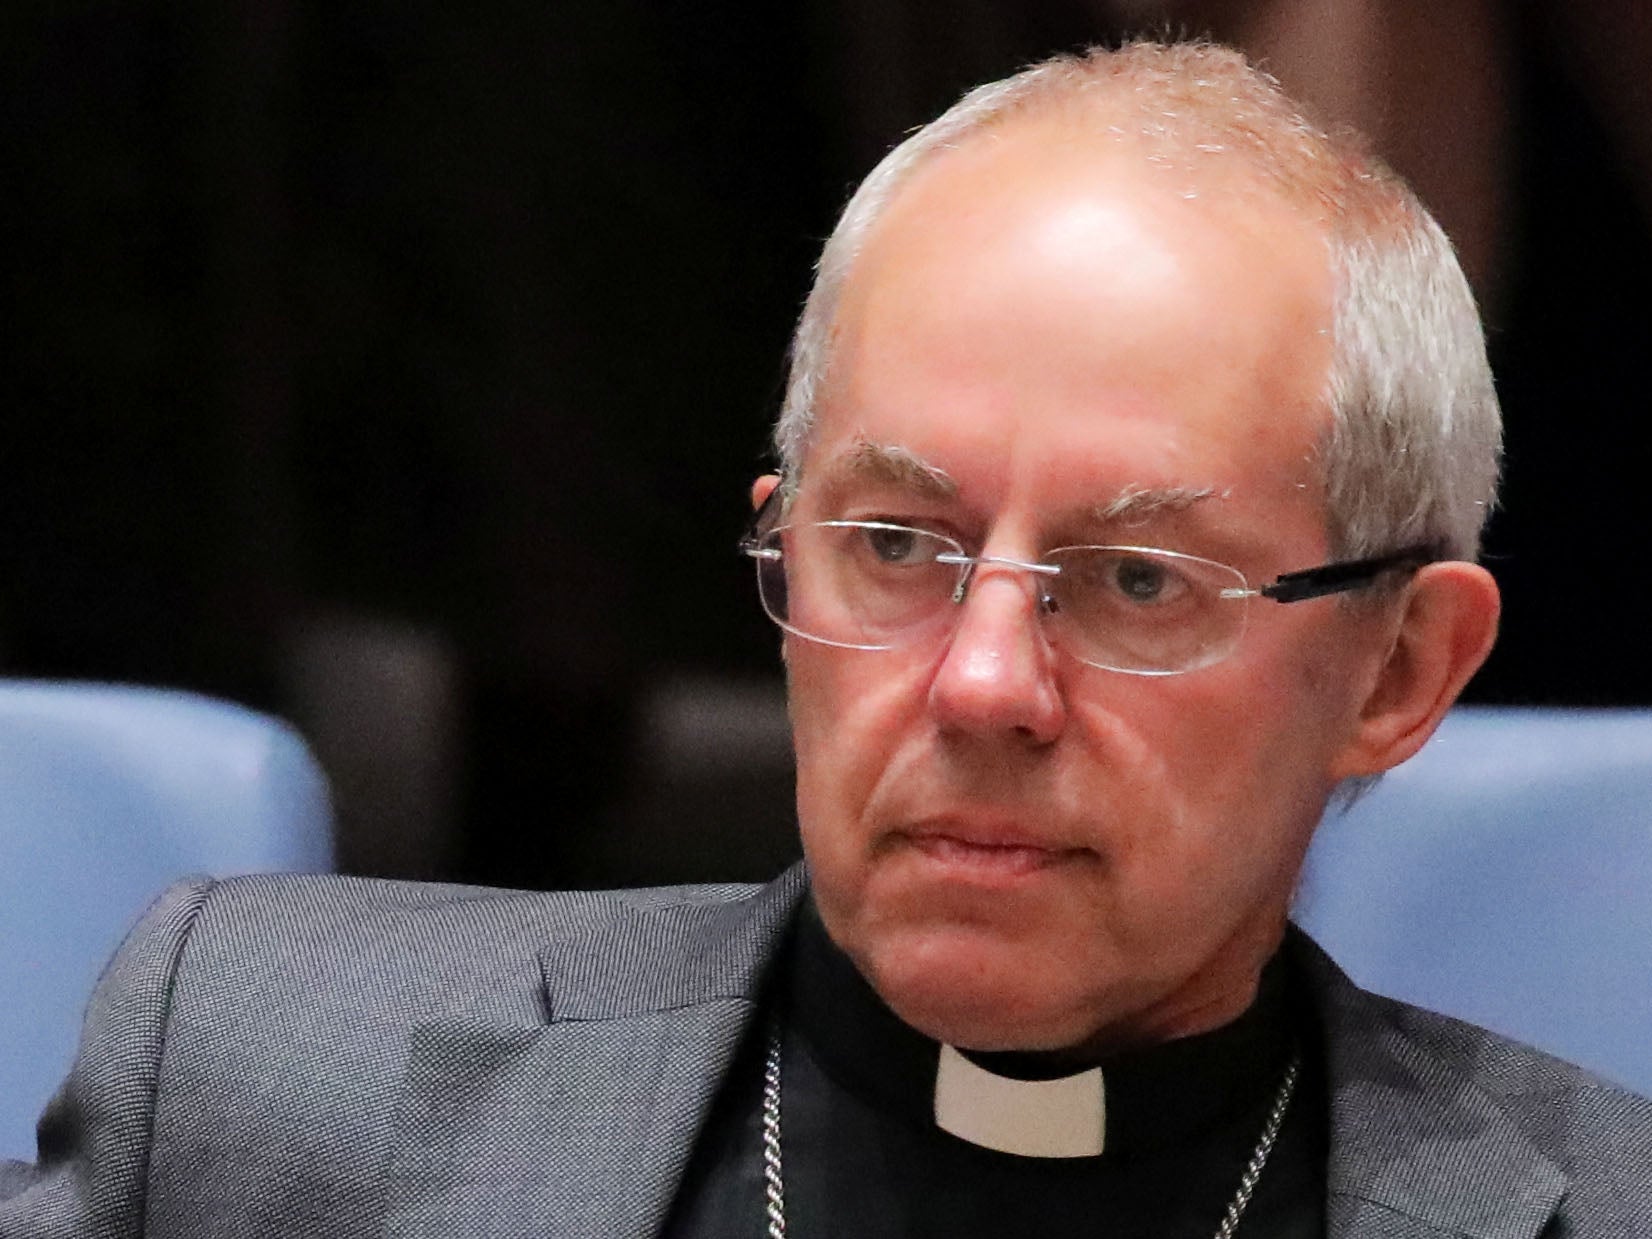 Bishops involved in sexual abuse do not get 'an easy ride', Archbishop of Canterbury claims